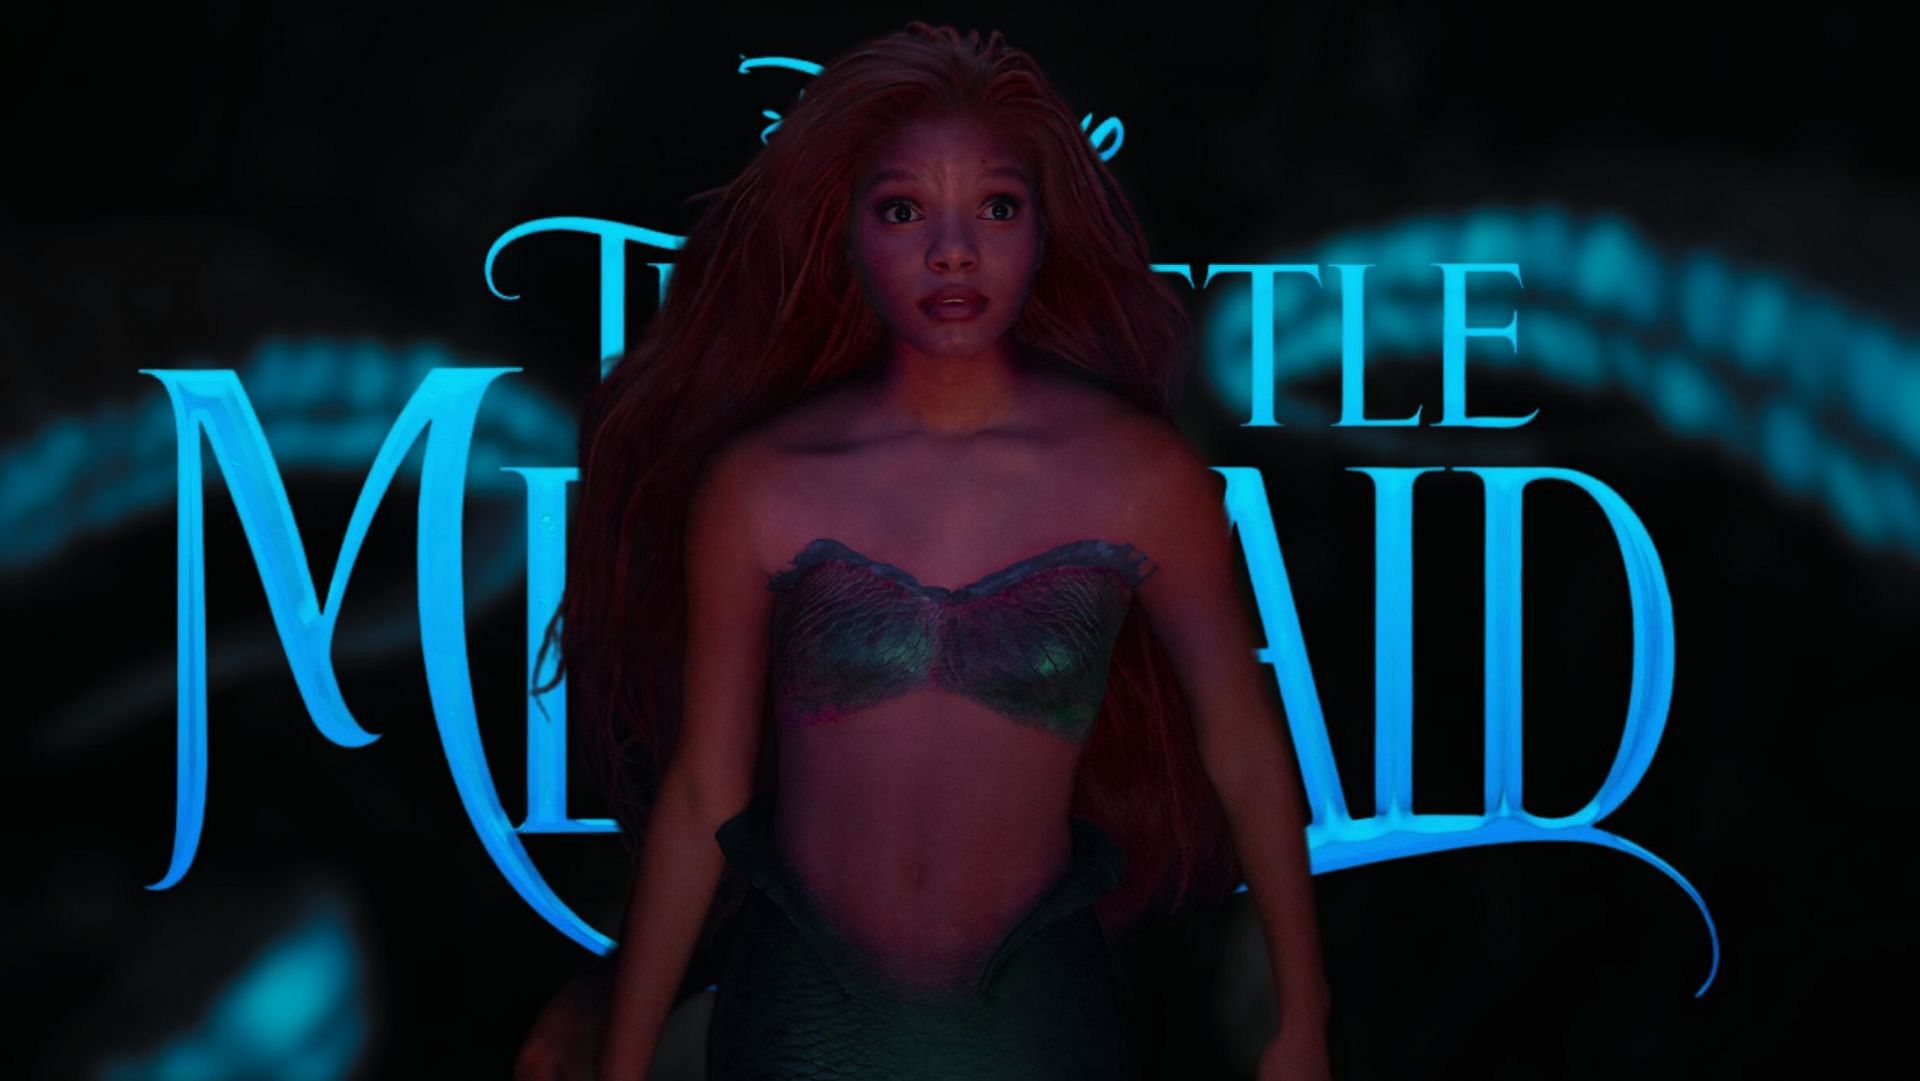 Disney's The Little Mermaid 2 Stars of the remake share excitement for